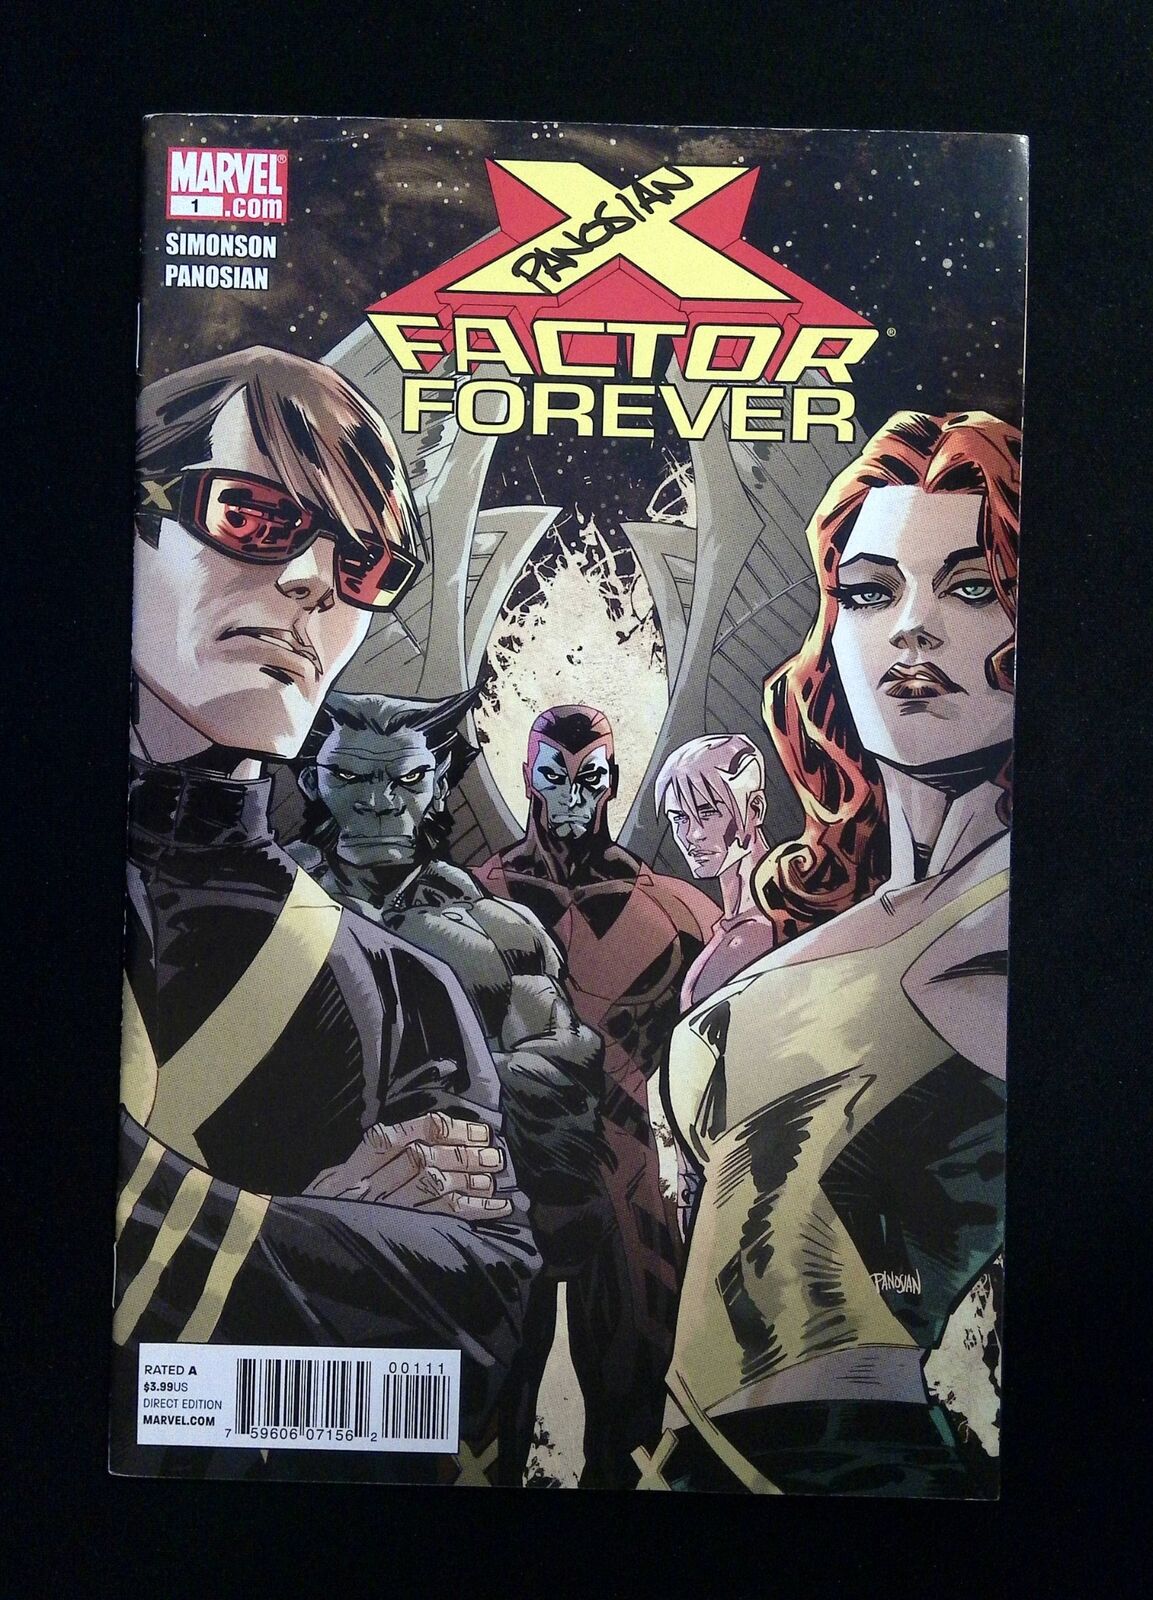 X-Factor Forever #1  Marvel Comics 2010 VF+  Signed By Dan Panosian